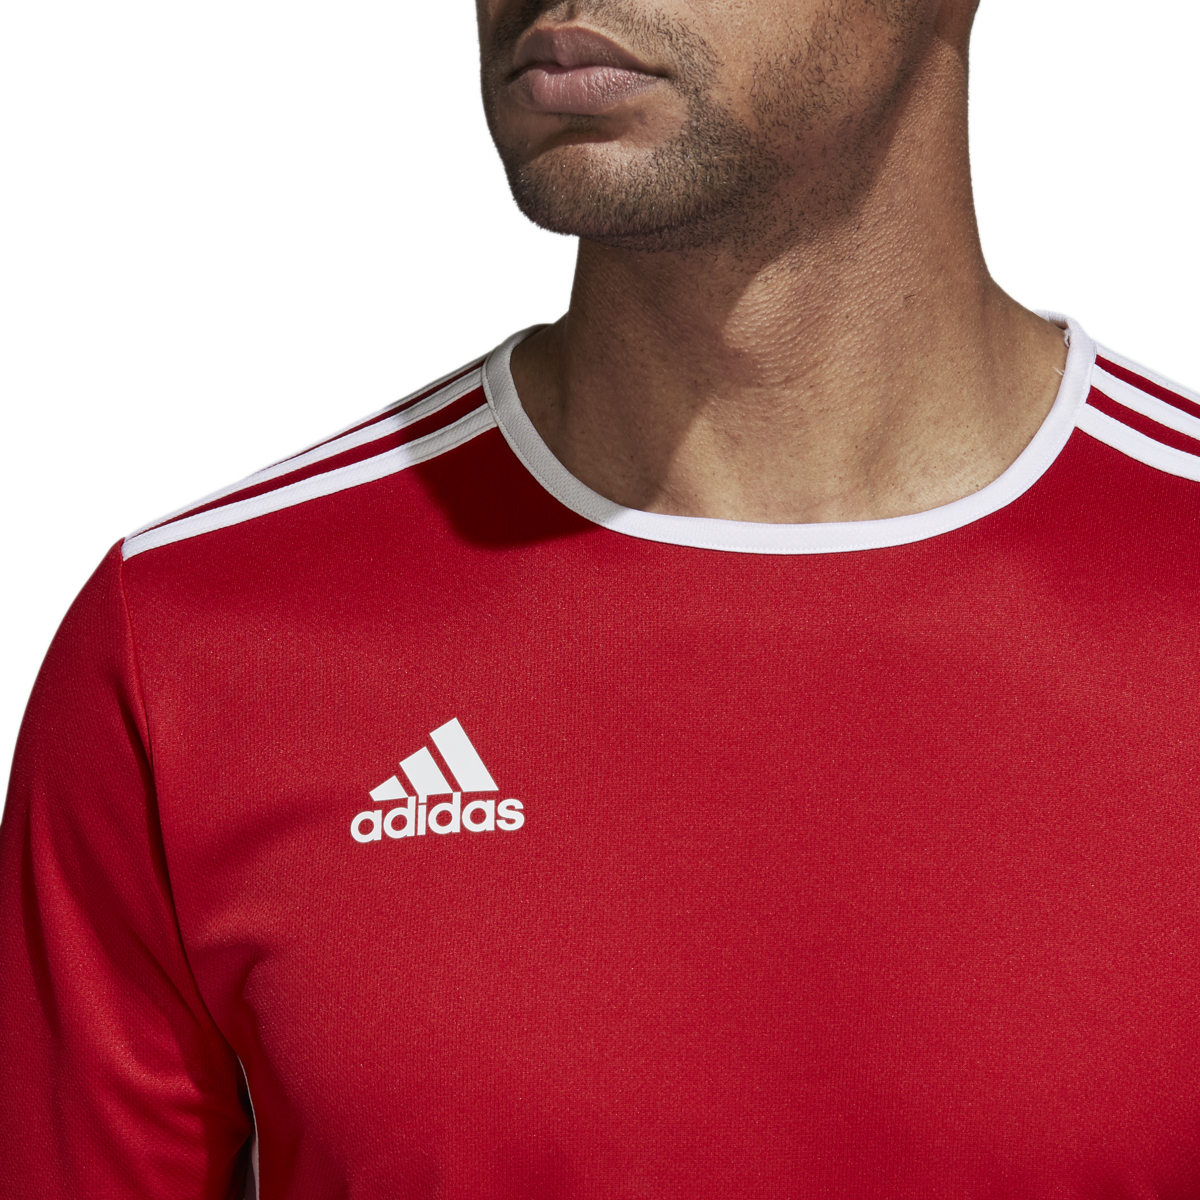 Men's Adidas Entrada 18 Soccer Jersey Red/White - XS - image 4 of 6